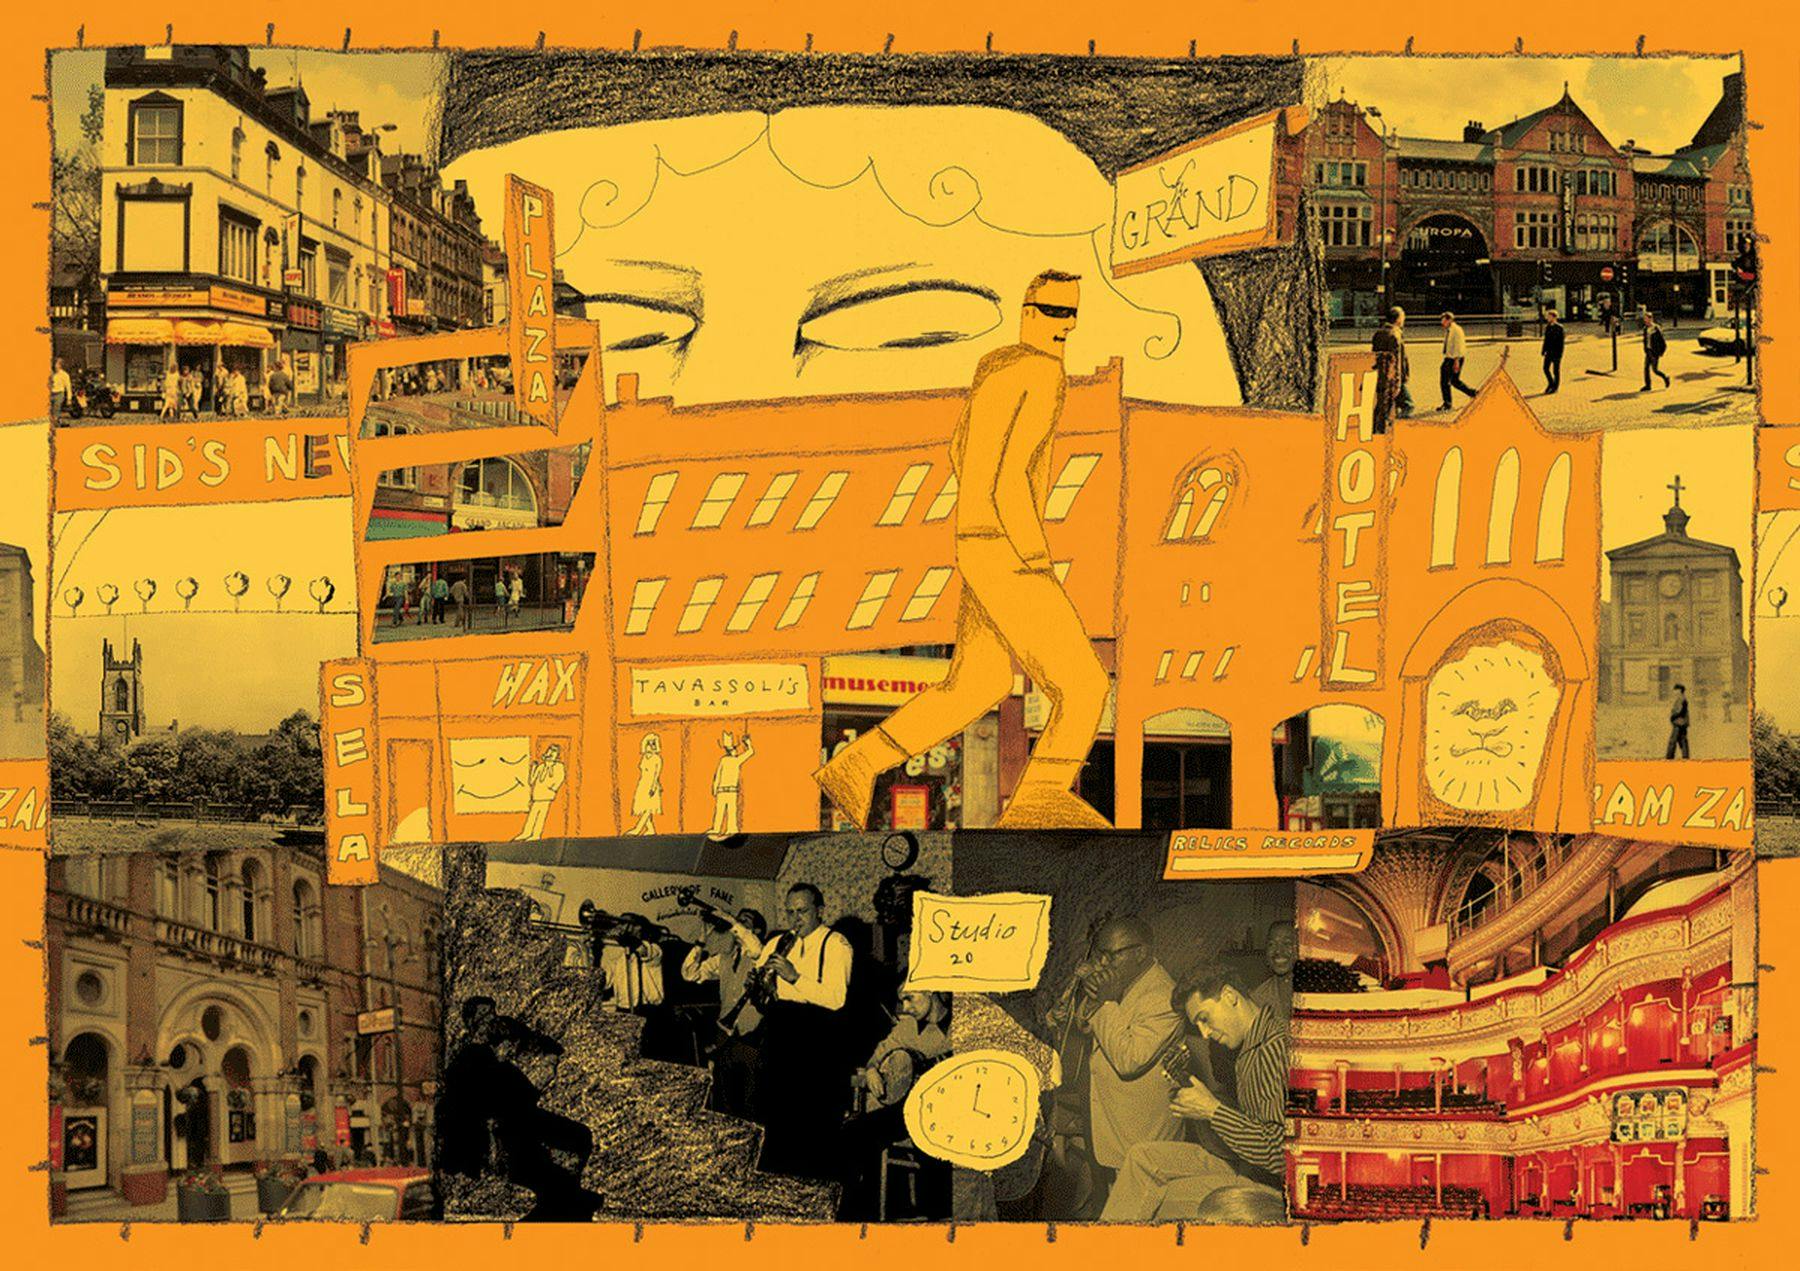 A collage of photographs and drawn images of theatres and other Leeds landmarks. The drawn images consist of sketches, orange is the main thematic colour.